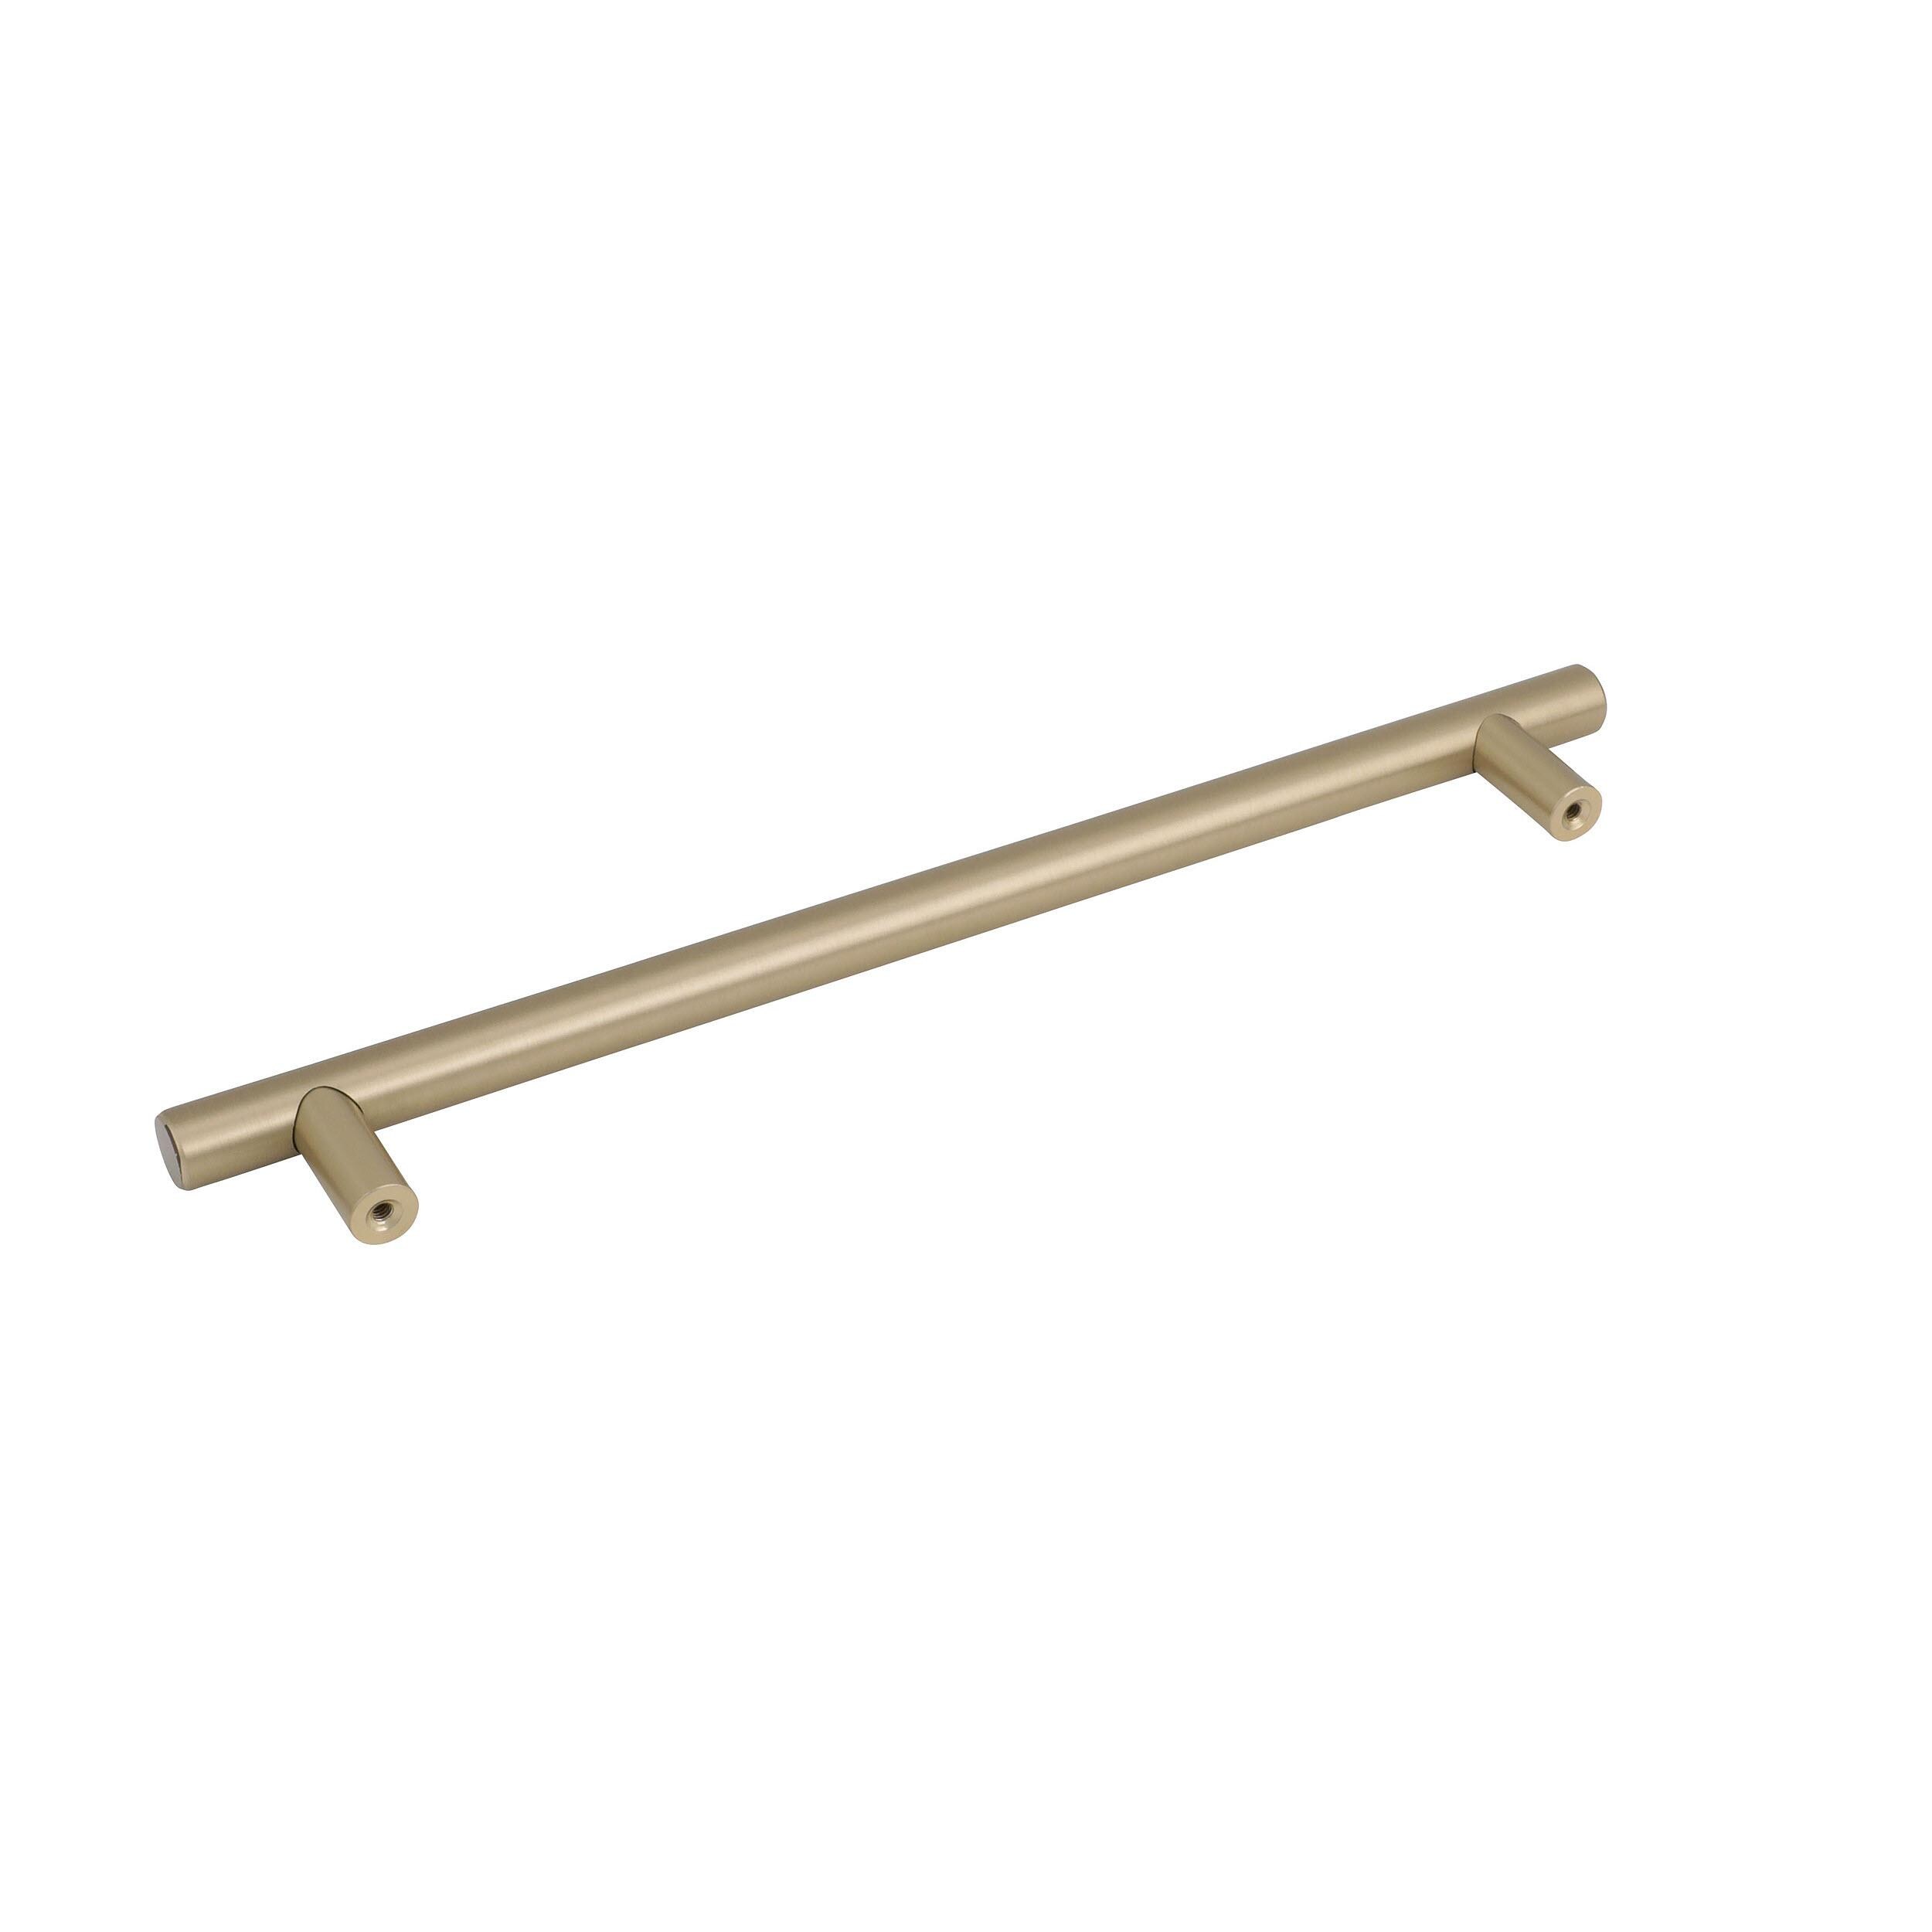 Amerock Bar Pulls 12-in Center to Center Golden Champagne Cylindrical Bar For Use on Appliances Drawer Pulls